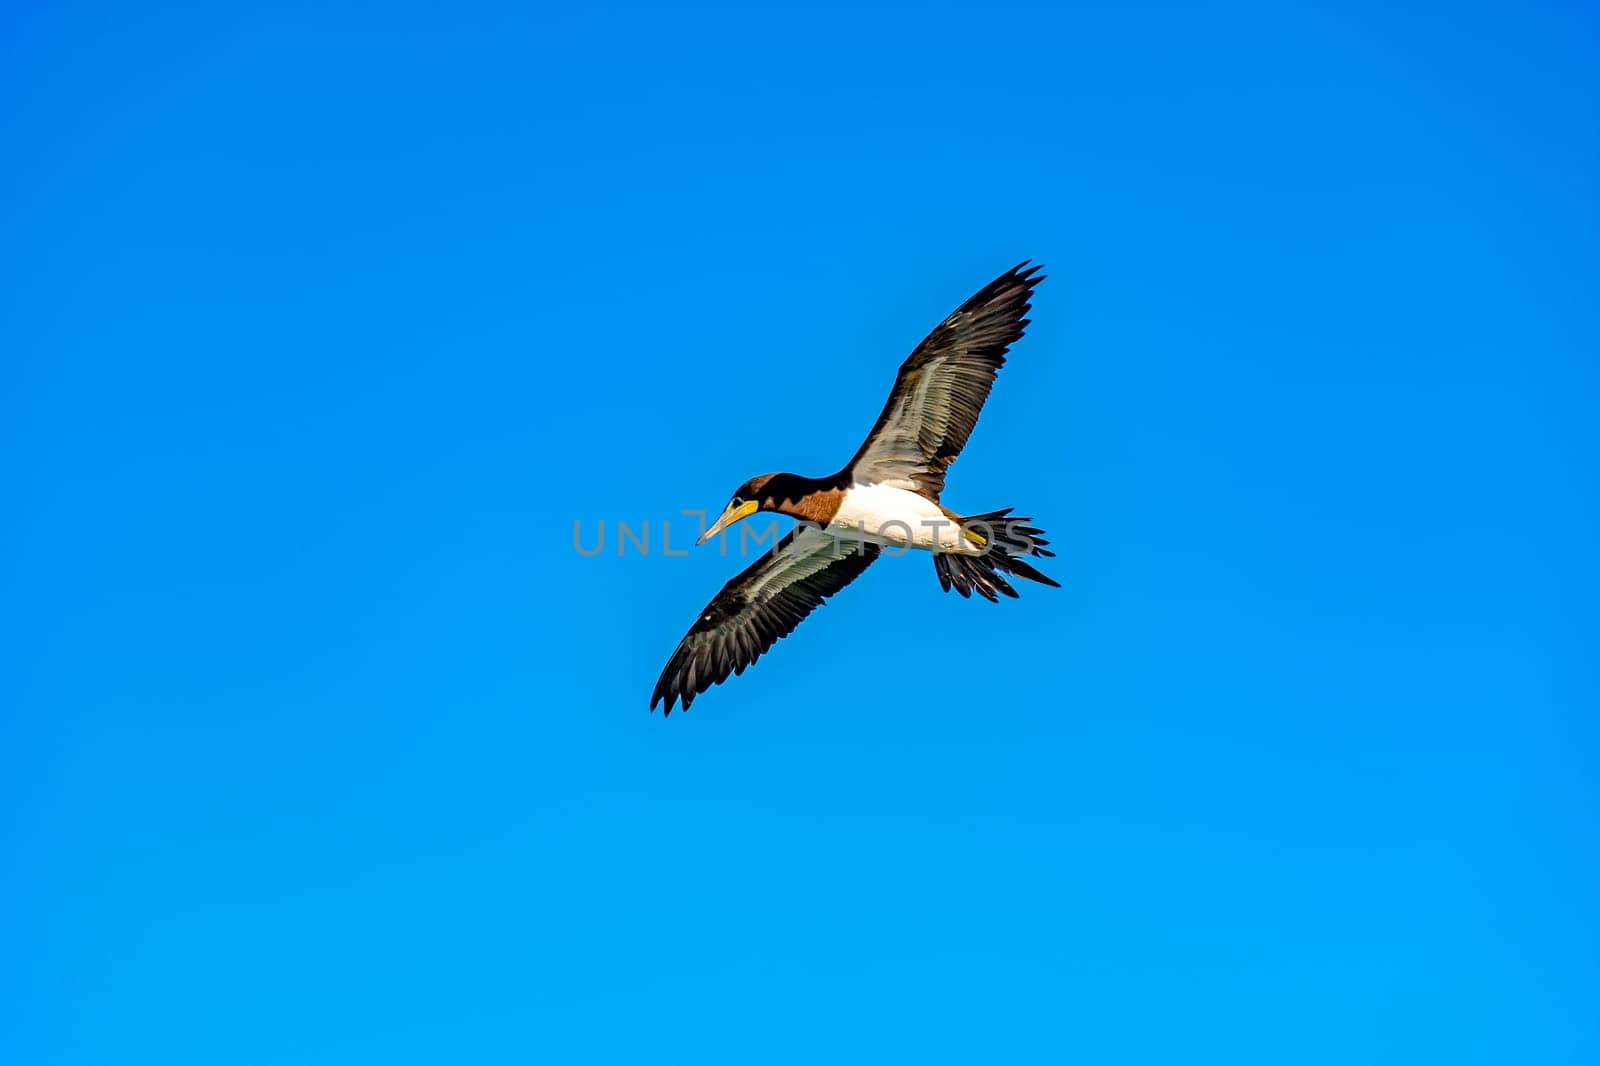 Tropical seabird flying with open wings and blue sky behind